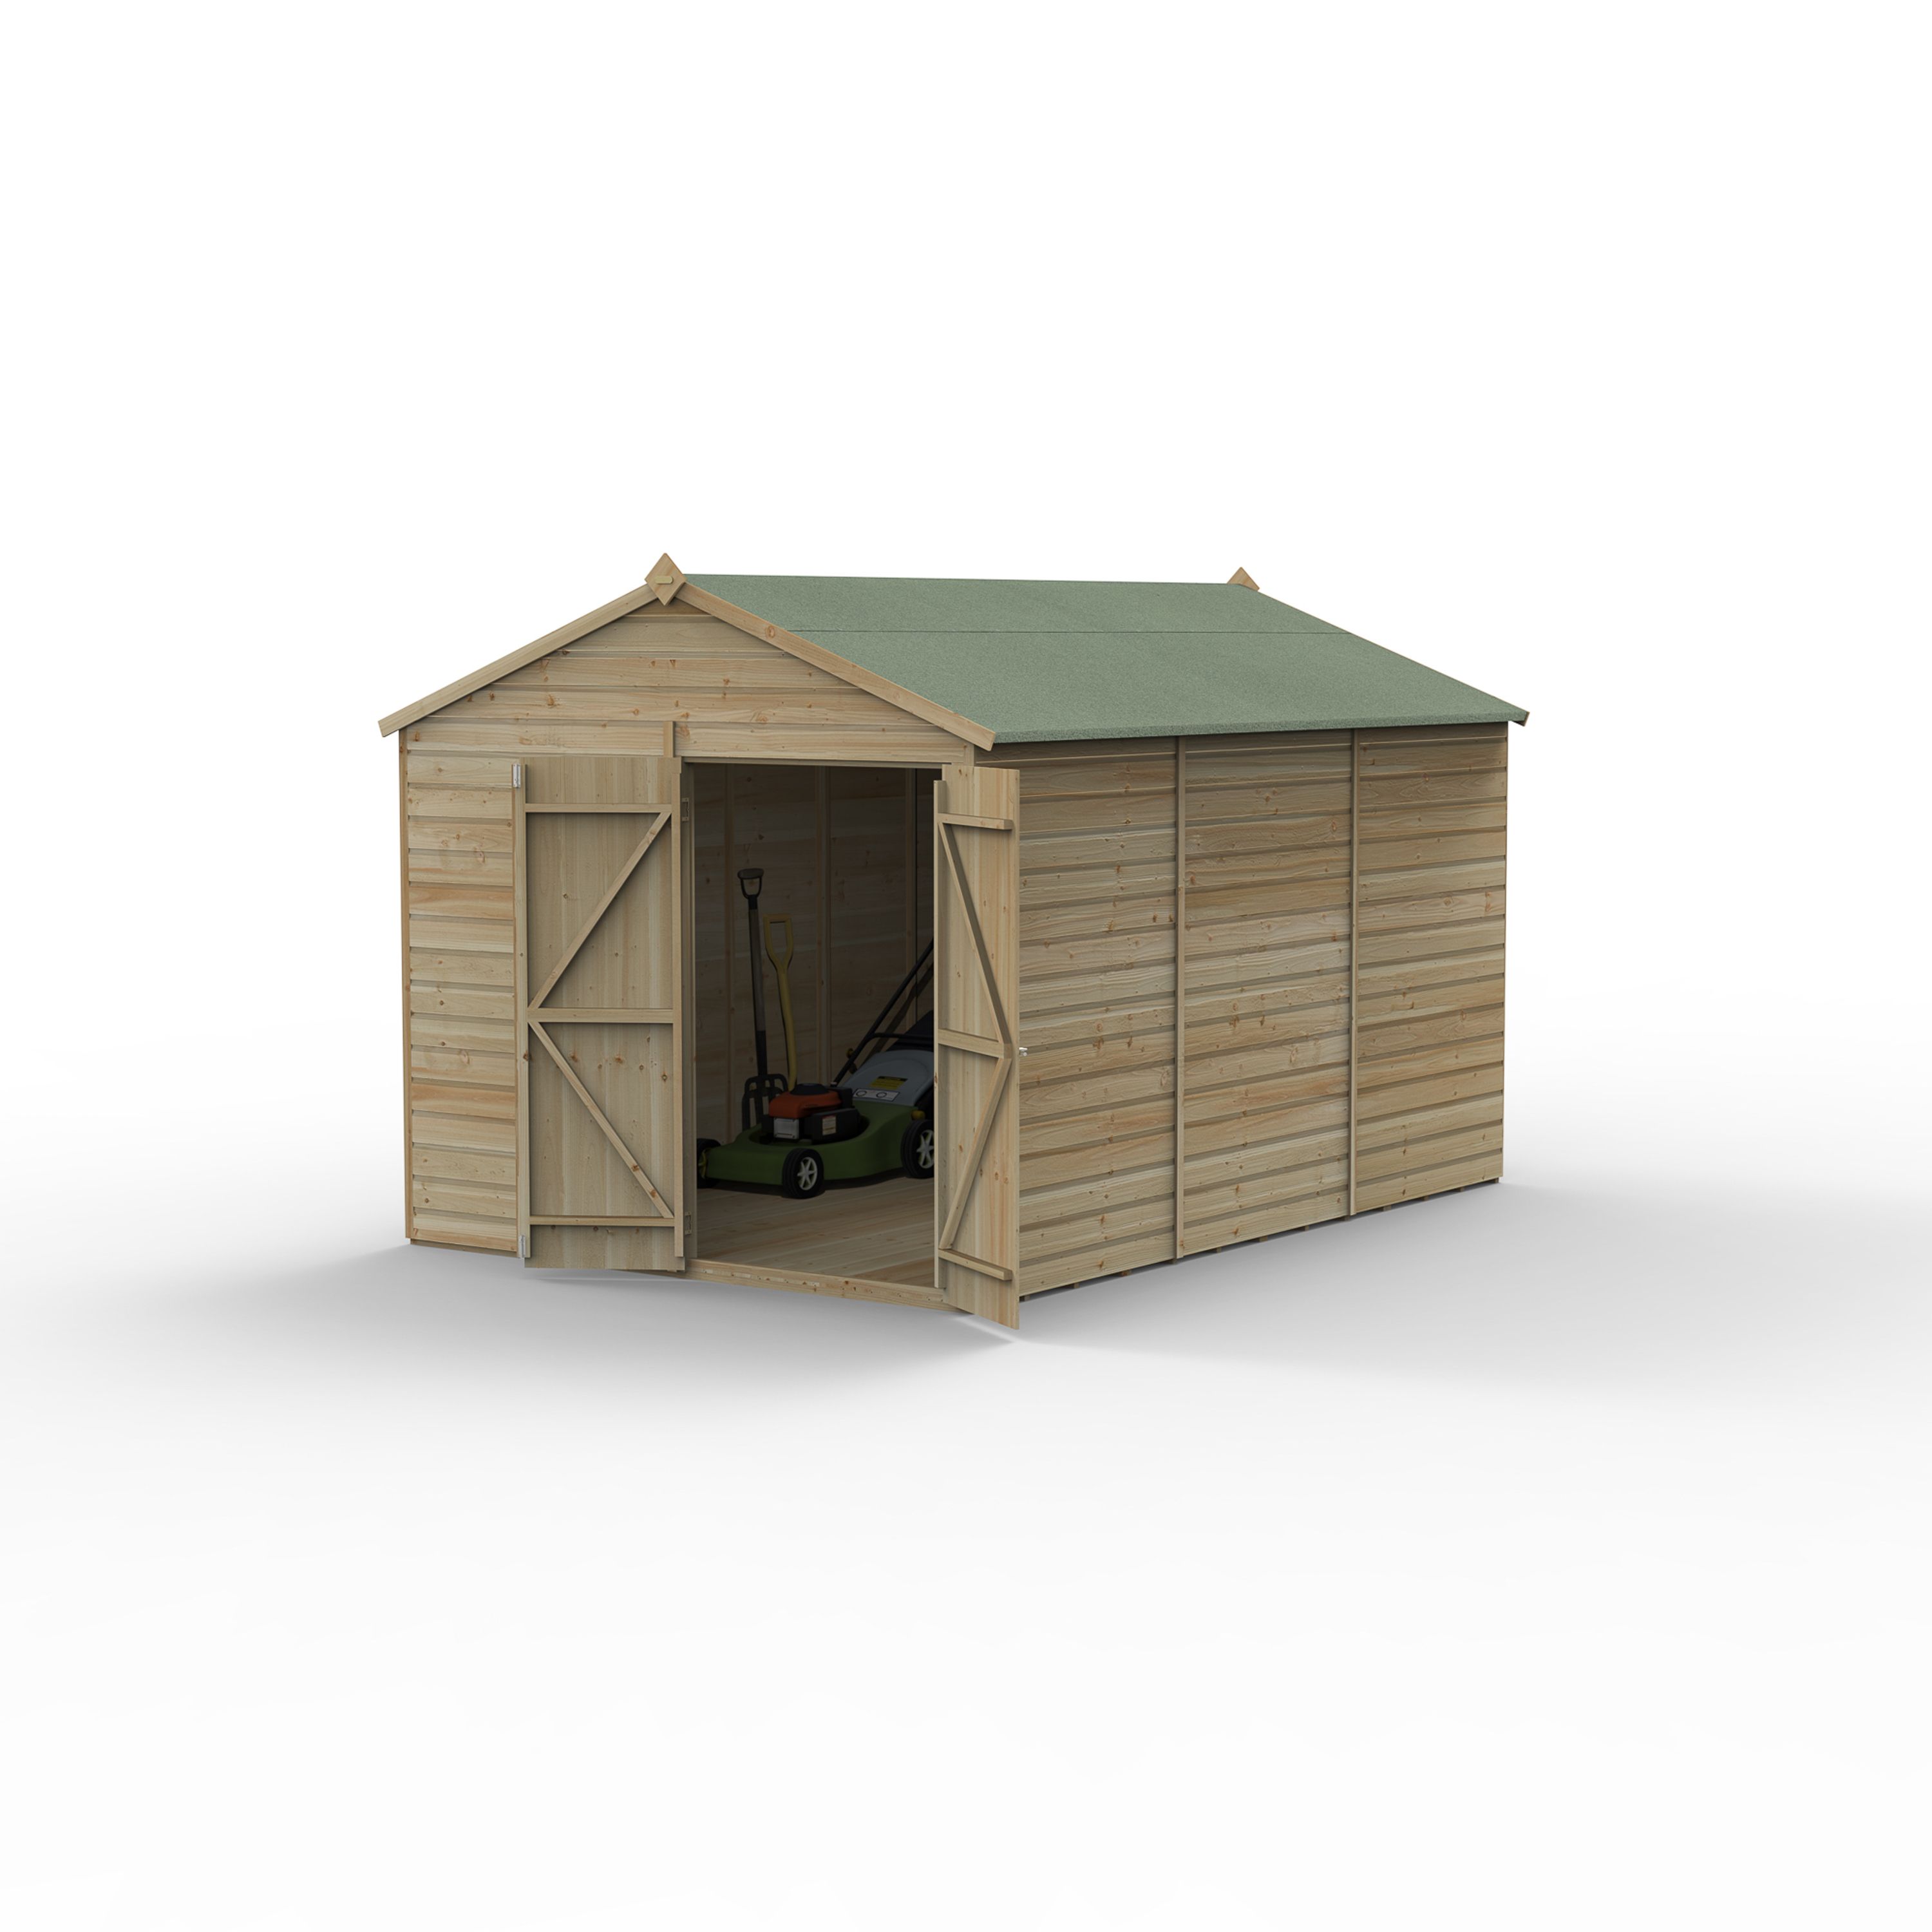 Forest Garden Beckwood 12x8 ft Apex Natural timber Wooden 2 door Shed with floor (Base included) - Assembly not required